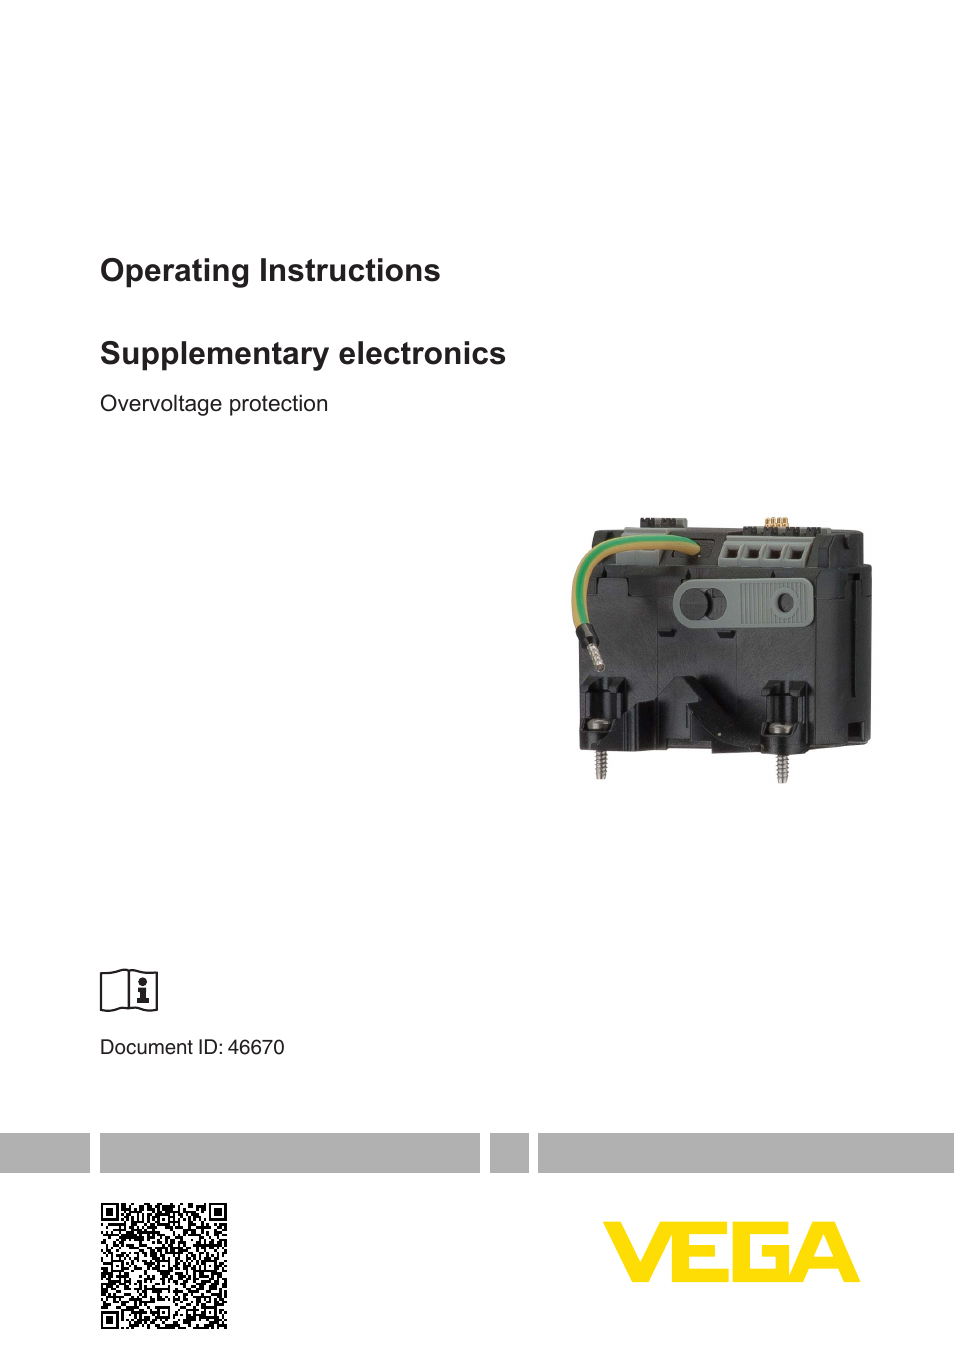 Supplementary electronics Overvoltage protection